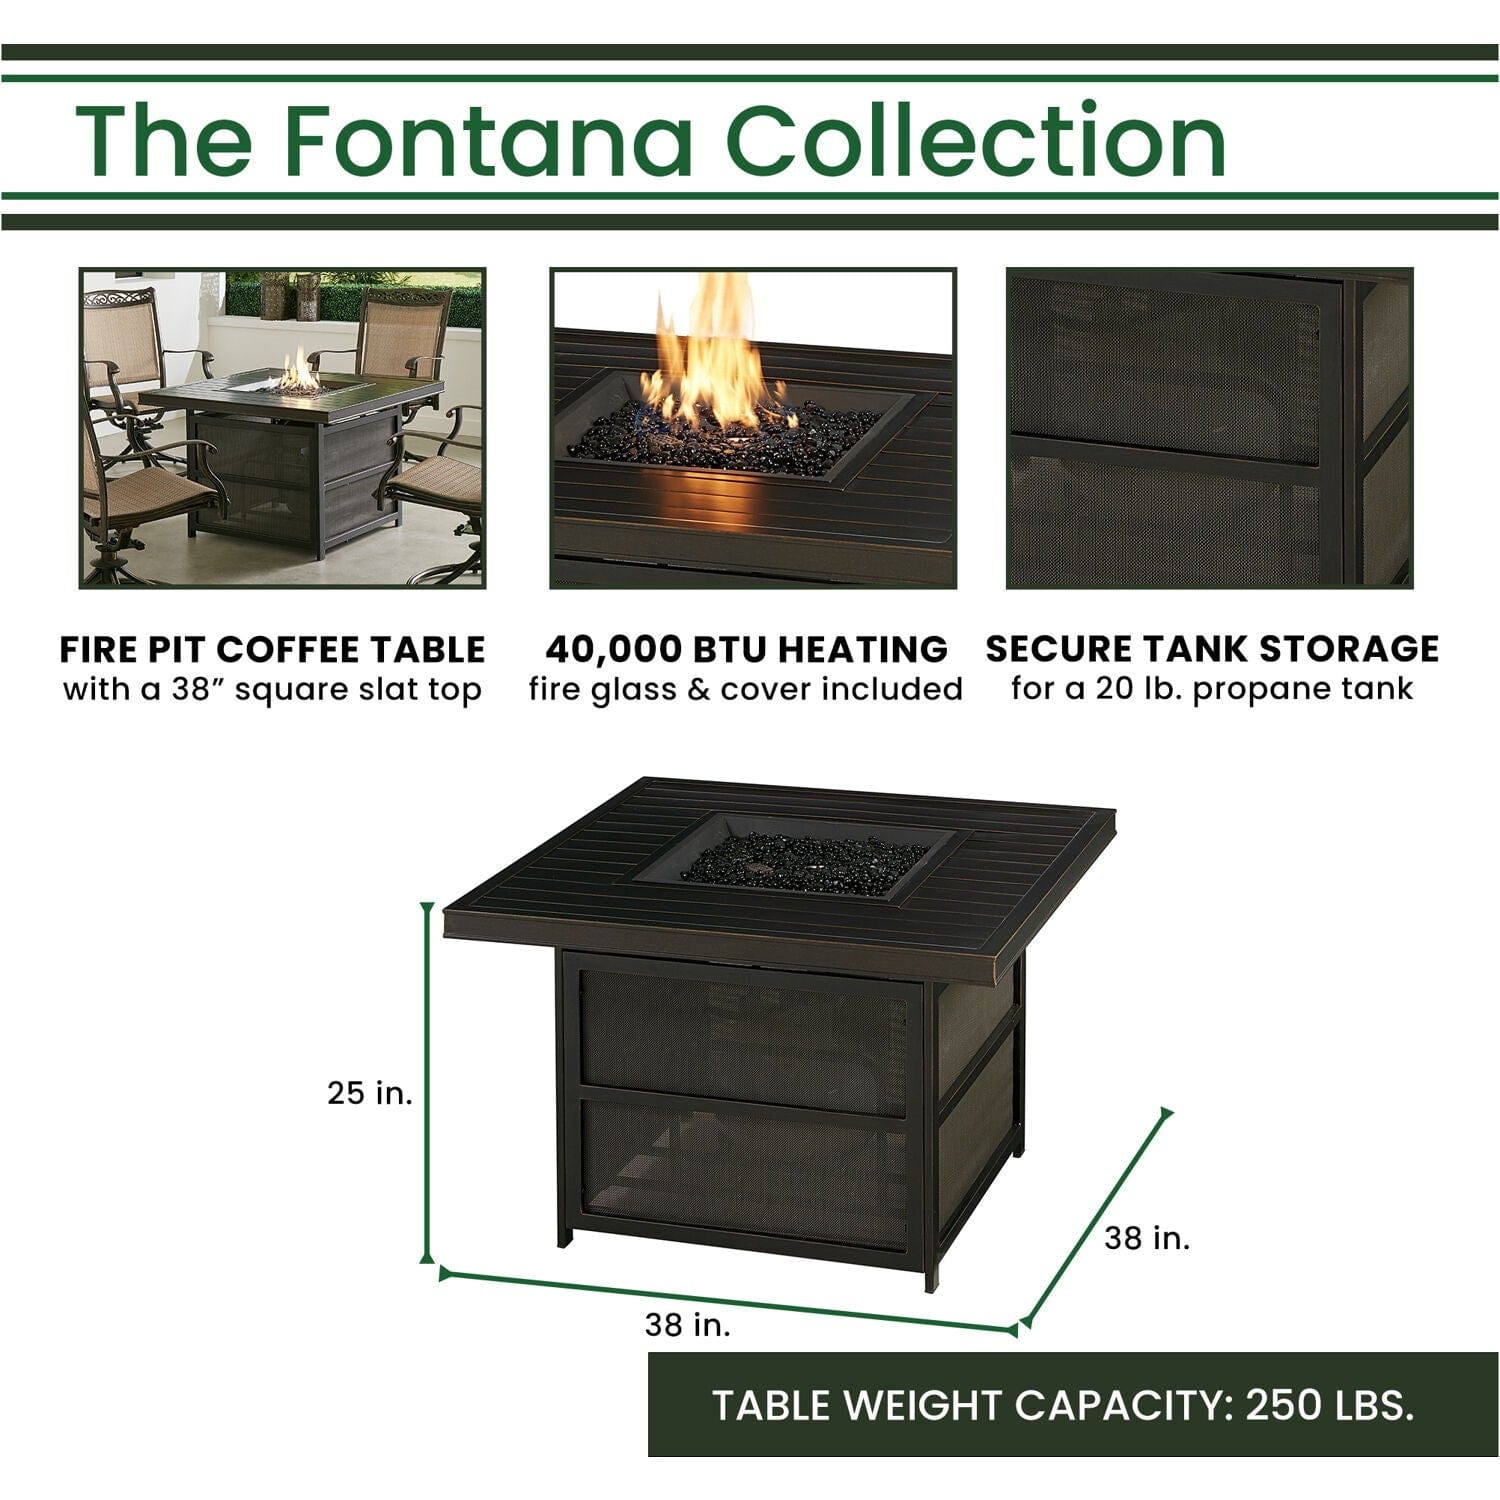 Hanover Fire Table Dining Set Hanover - Fontana 5 Piece Fire Pit: 4 Sling Swivel Rockers, 38" Square Slat Top Fire Pit | FNT5PCSLSW4FP